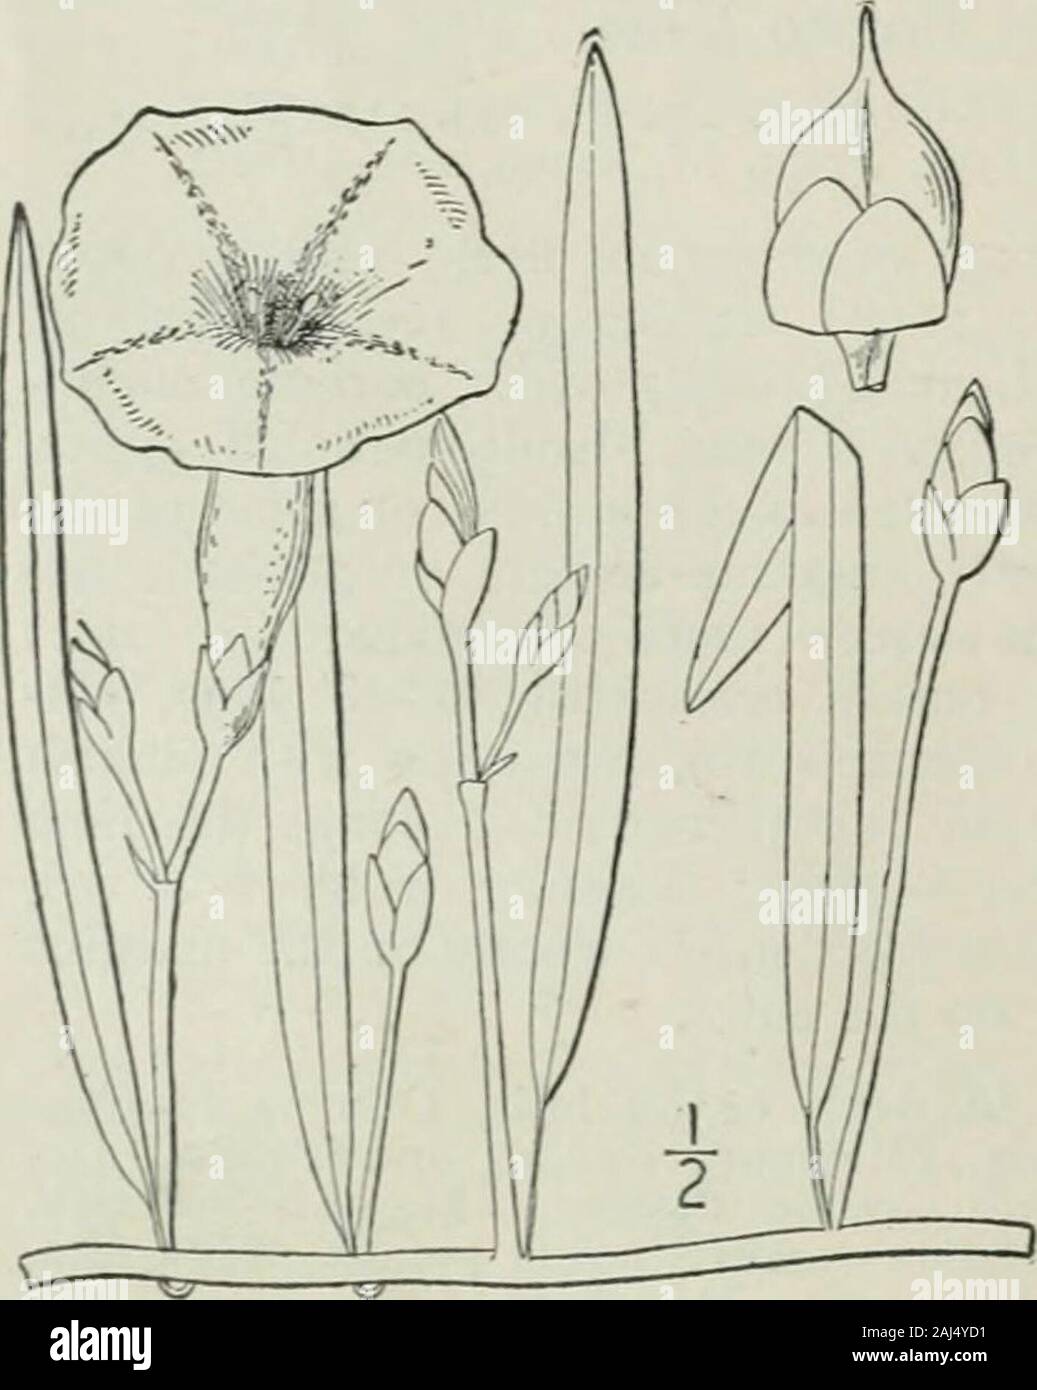 An illustrated flora of the northern United States, Canada and the British possessions : from Newfoundland to the parallel of the southern boundary of Virginia and from the Atlantic Ocean westward to the 102nd meridian . 4. Ipomoea leptophylla Torr. Bushr^Iorning-1 glory. Fig. 3433. Ipomoea leptophylla Torr. in Frem. Rep. 95. 1845. Perennial from an enormous root, which some-times weighs 25 lbs., glabrous throughout; stemserect, ascending or reclining, rather stout, 2°-4°long, much branched. Leaves narrowly linear, en-tire, acute, 2-5 long, i-3 wide; petioles veryshort; peduncles stout, nearly Stock Photo